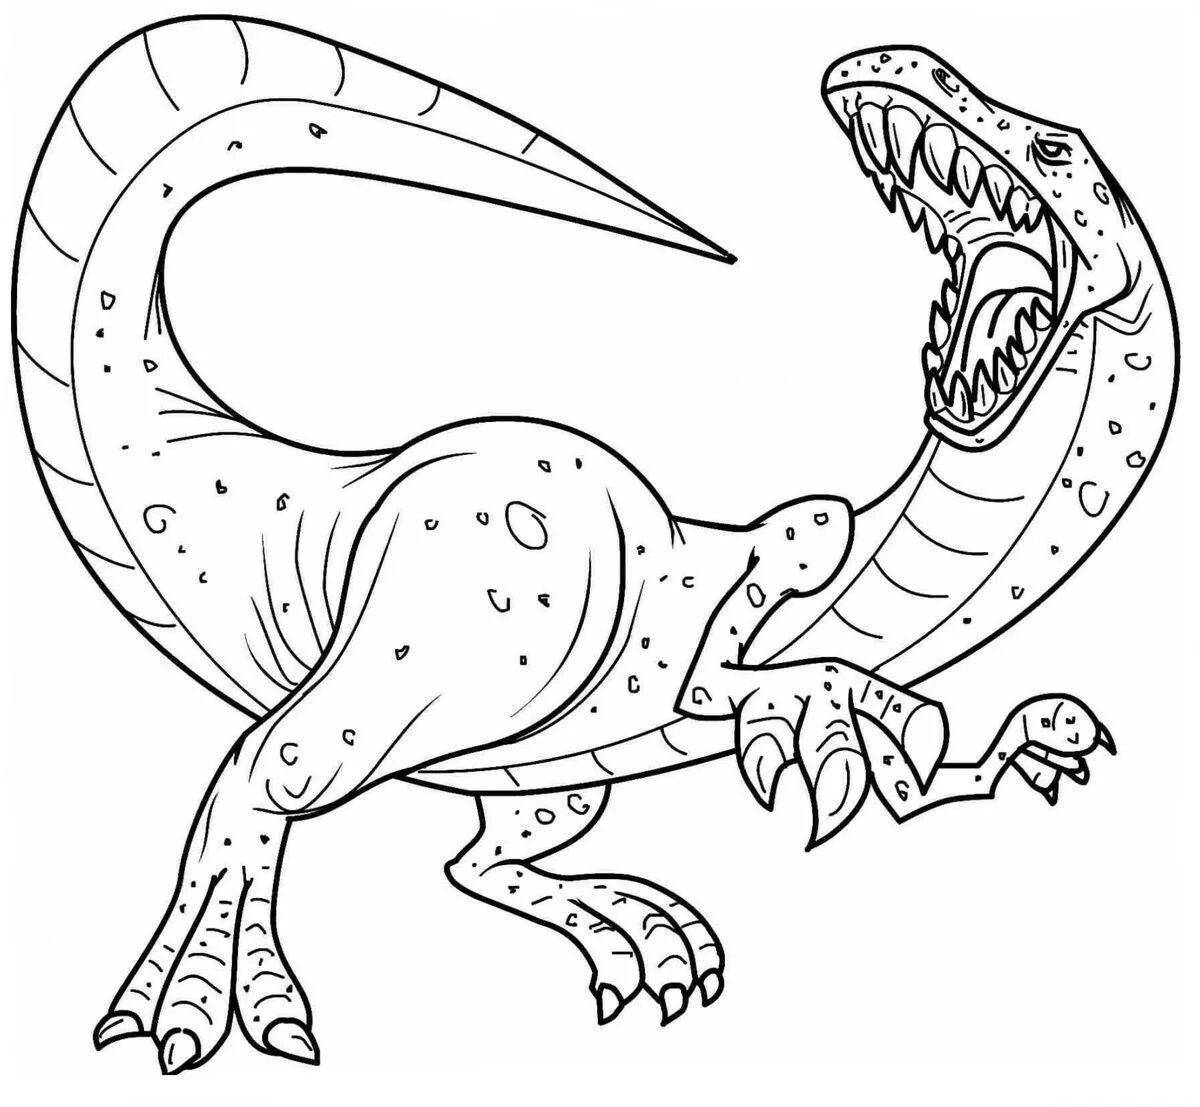 Playful dinosaur coloring book for kids